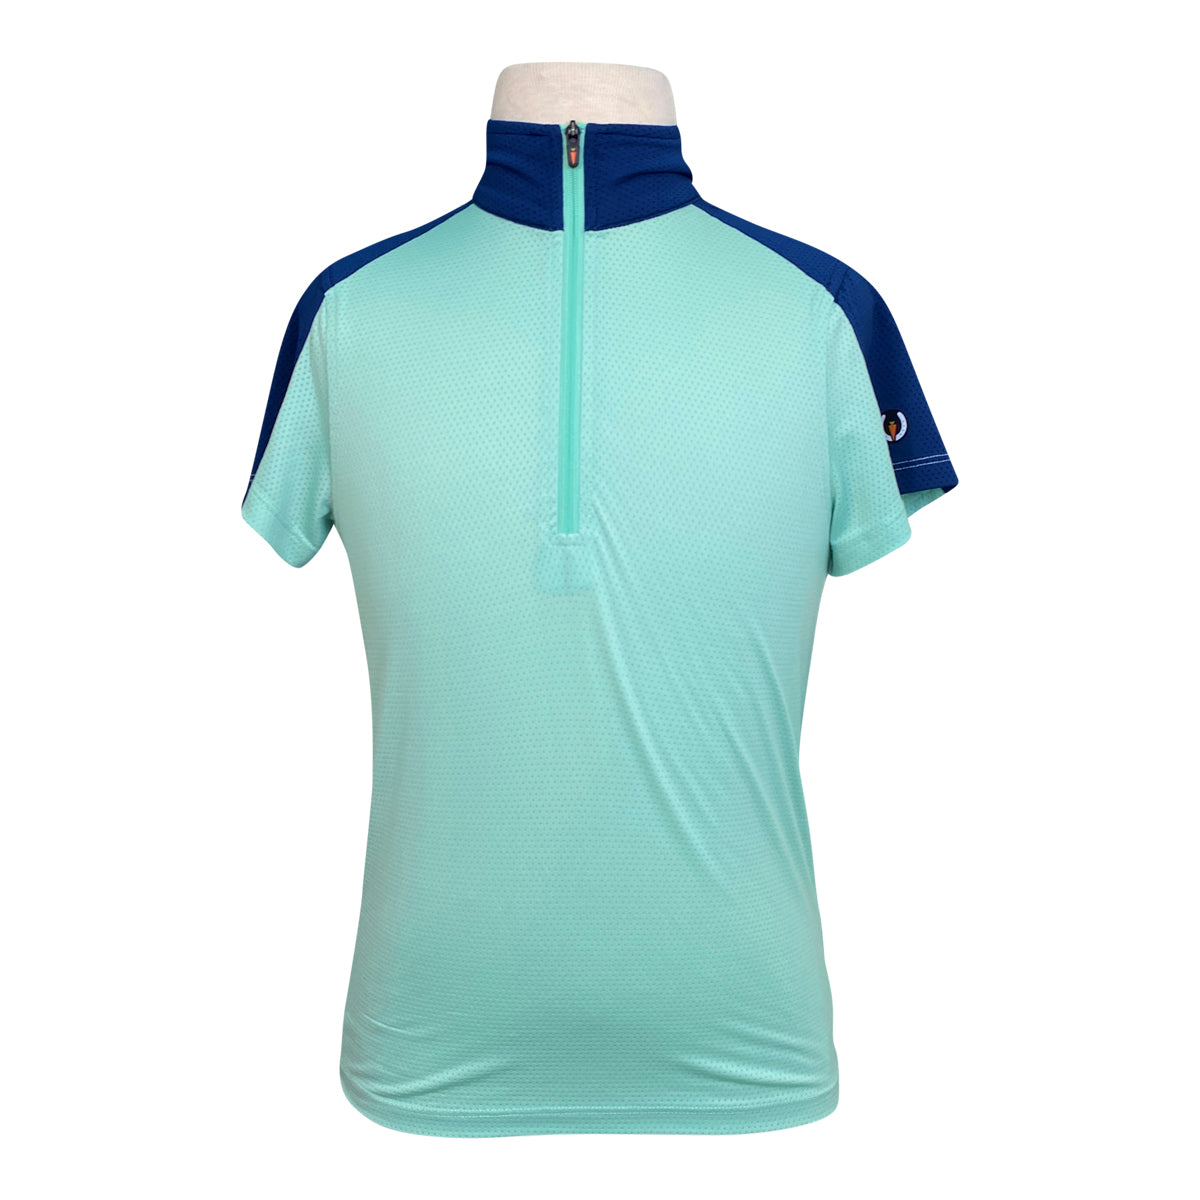 Kerrits 'Aire Ice Fil' Shirt in Mint/Navy